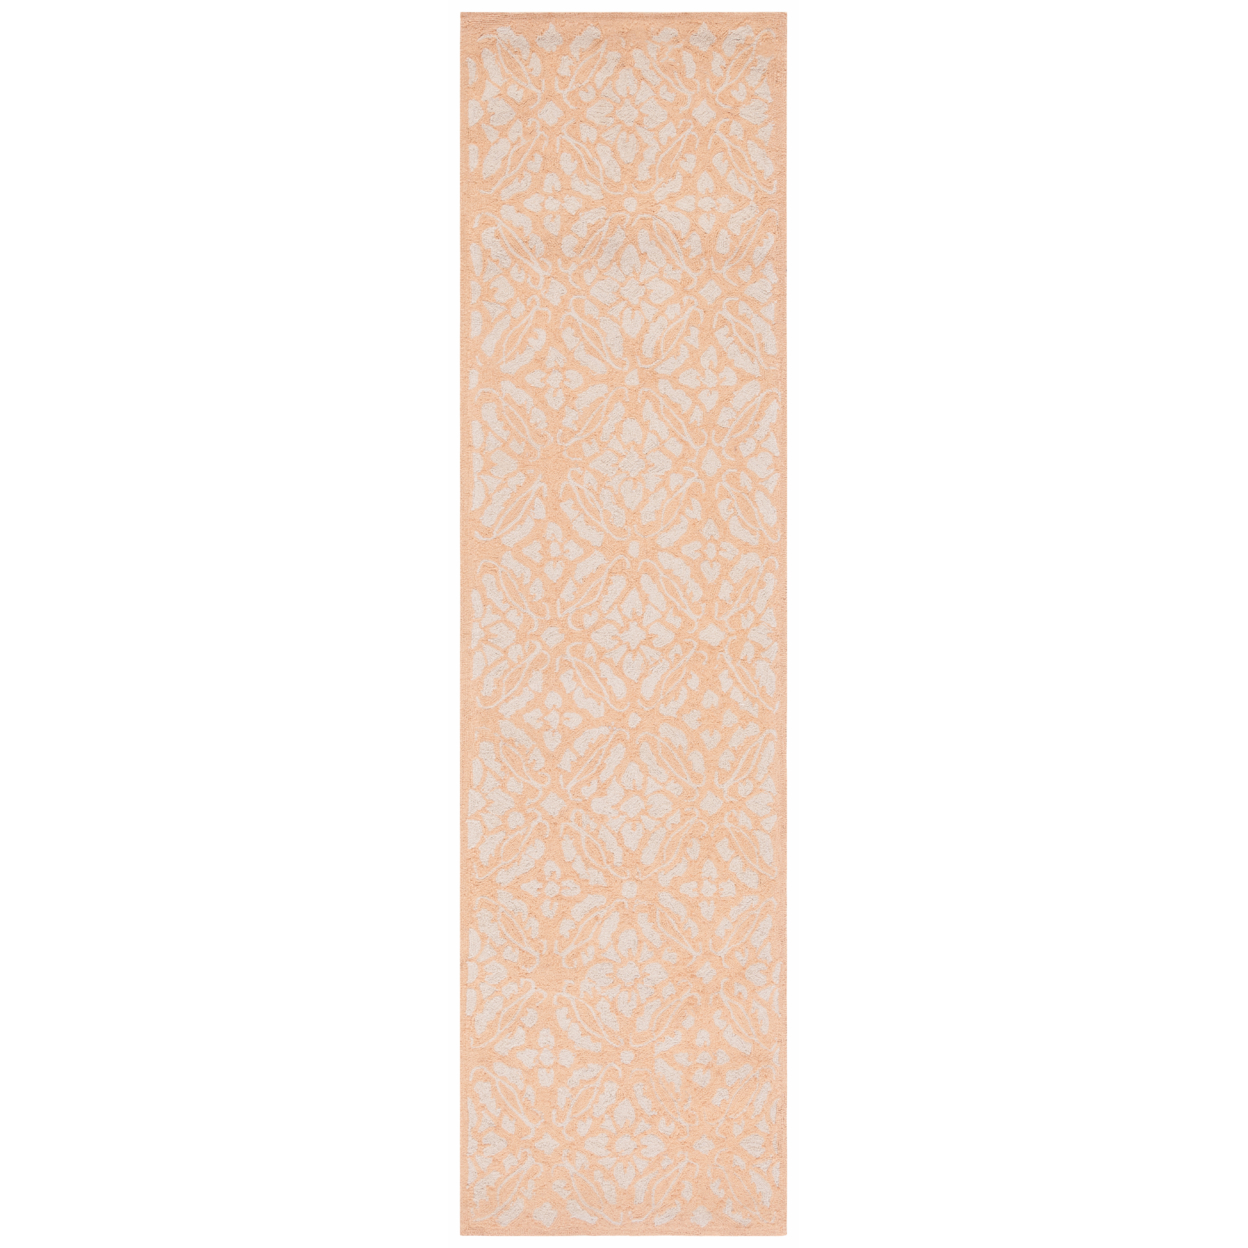 SAFAVIEH Chelsea Collection HK723C Hand-hooked Blush Rug - 2' 6 X 10'